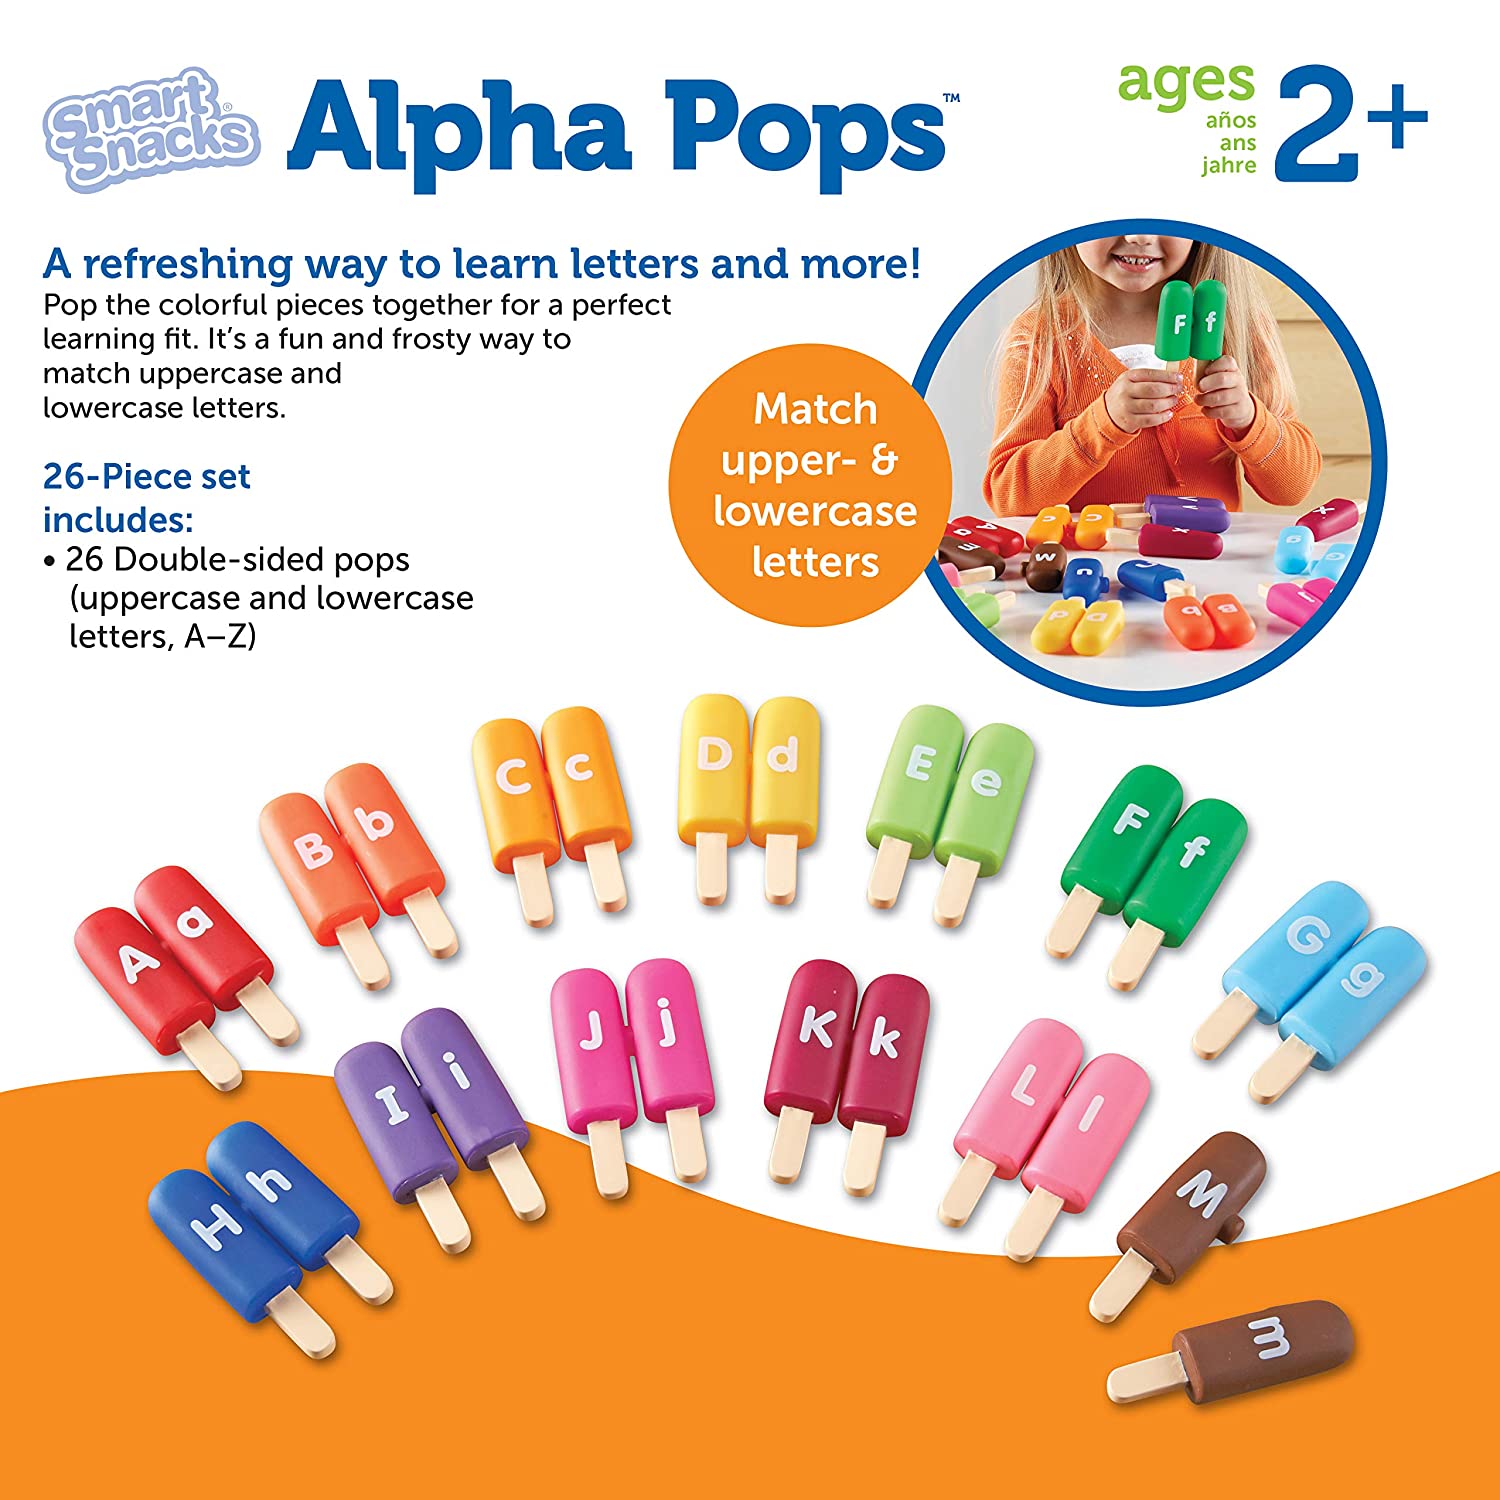 Learning Resources Smart Snacks Alpha Pops, Alphabet Learning & Fine Motor Skills Toy, Develops Letter Recognition, ABC for Kids, 26 Double Sided Pieces, Ages 2+